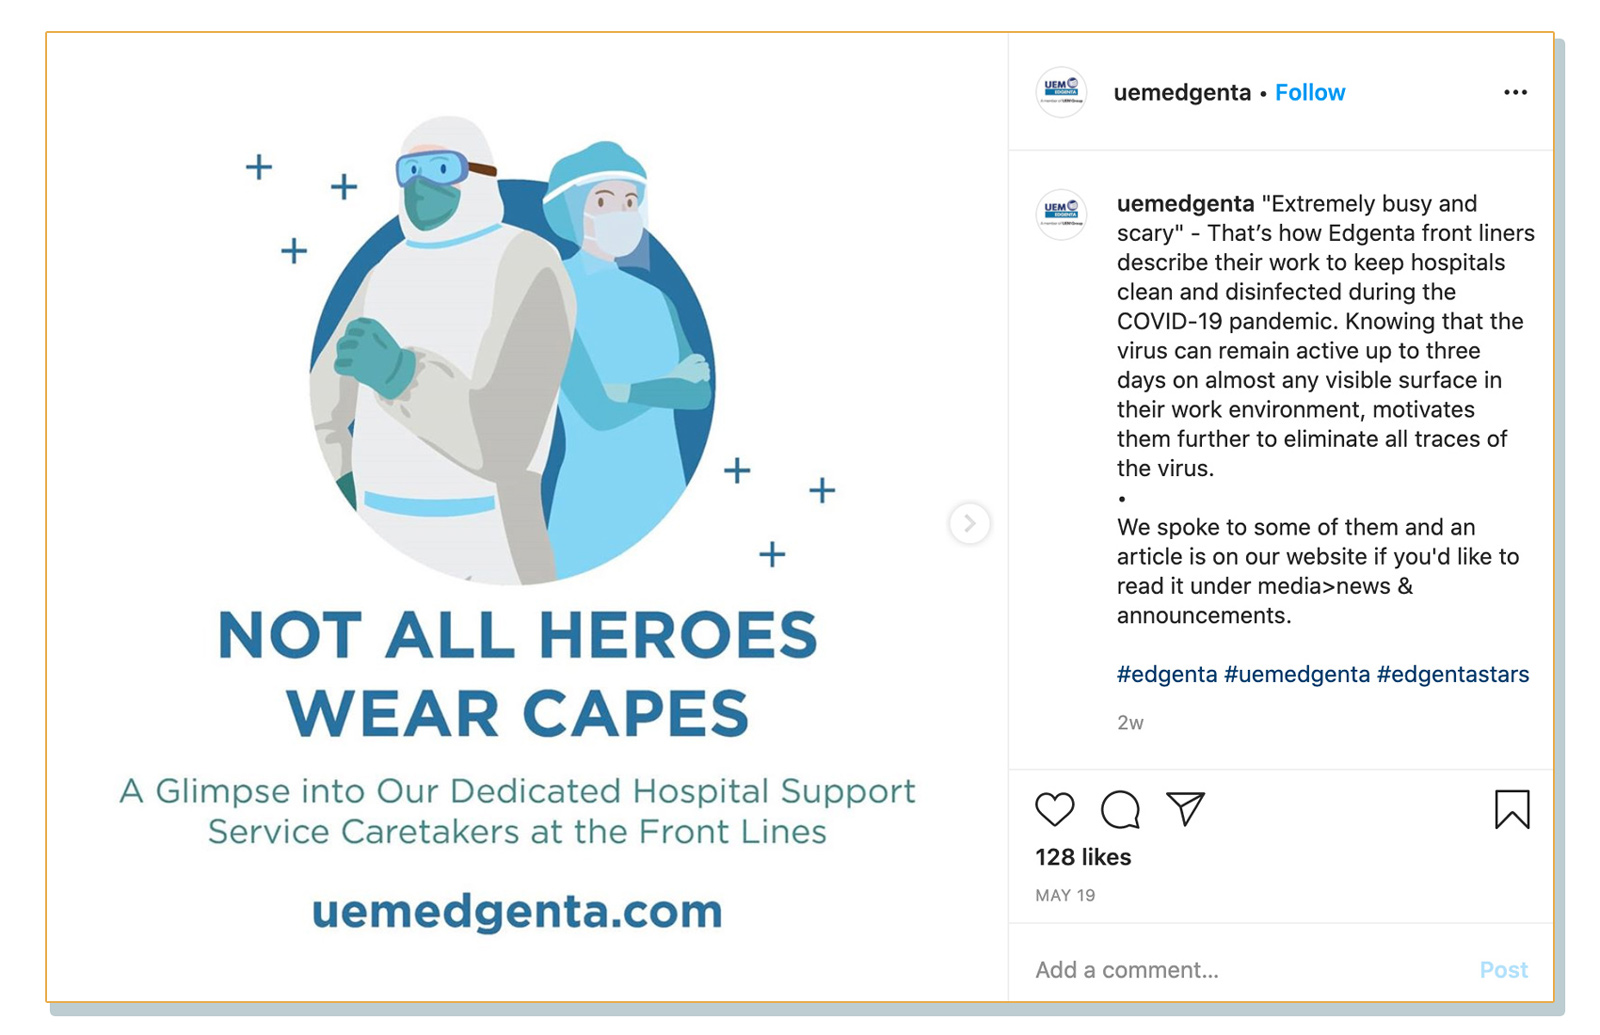 A post on UEMS’ official Instagram page, where the company advertises an article on their website interviewing hospital service workers in their employ.